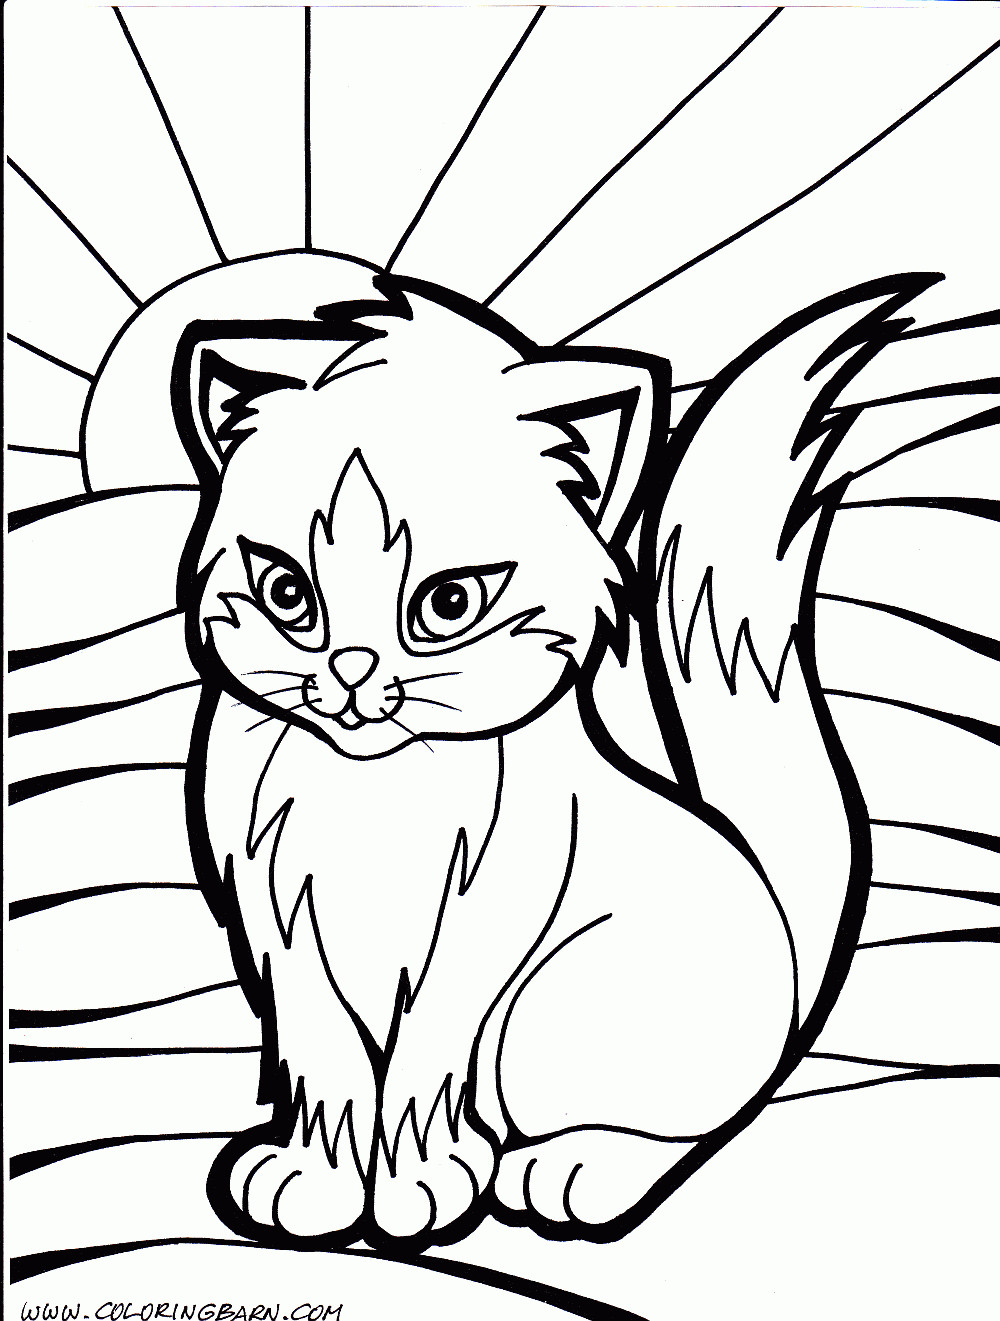 Cat Printable Coloring Pages
 A Simple Free Printable Cat Coloring Sheet